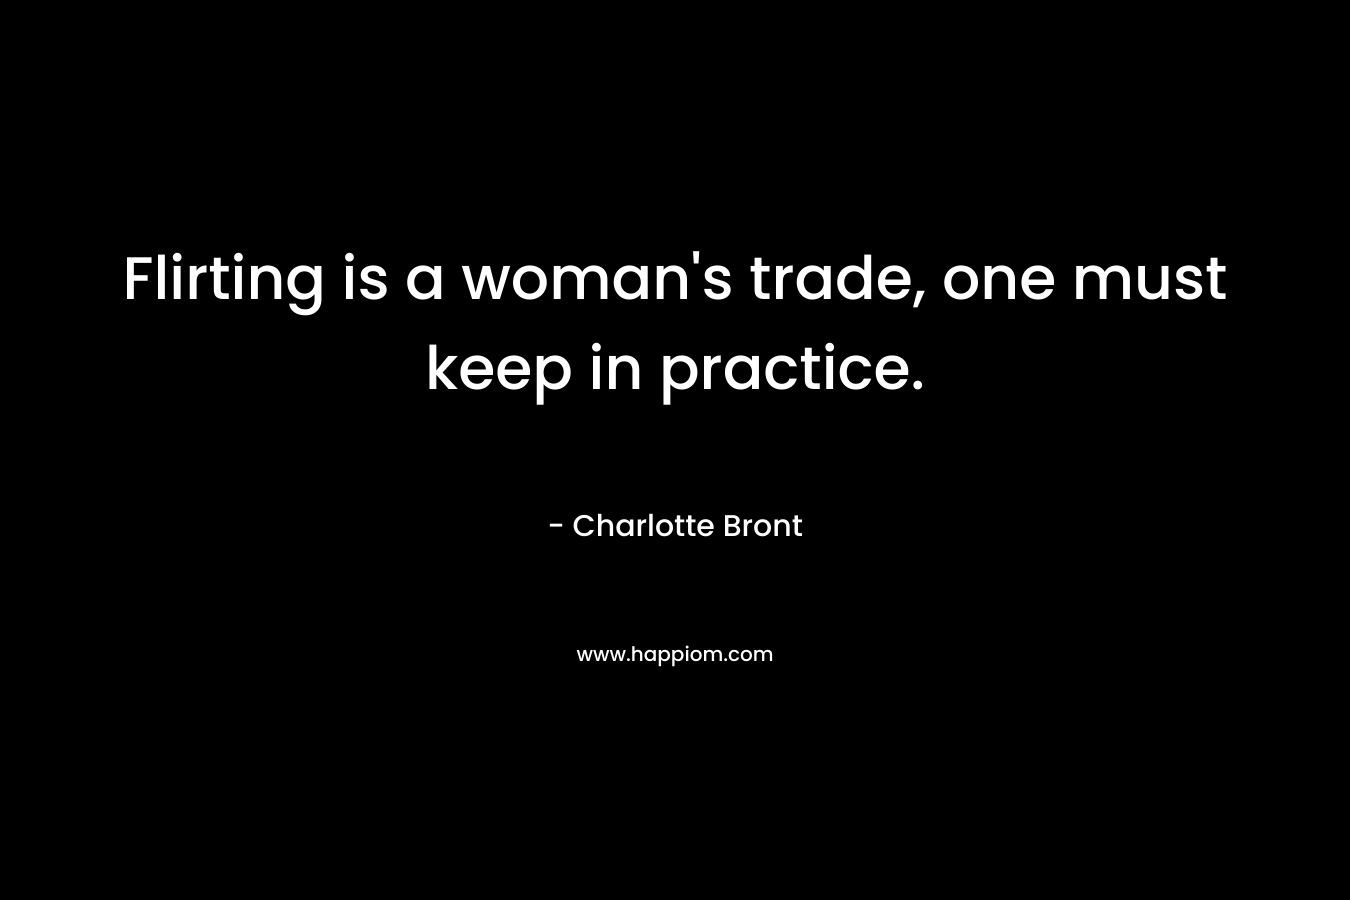 Flirting is a woman's trade, one must keep in practice.